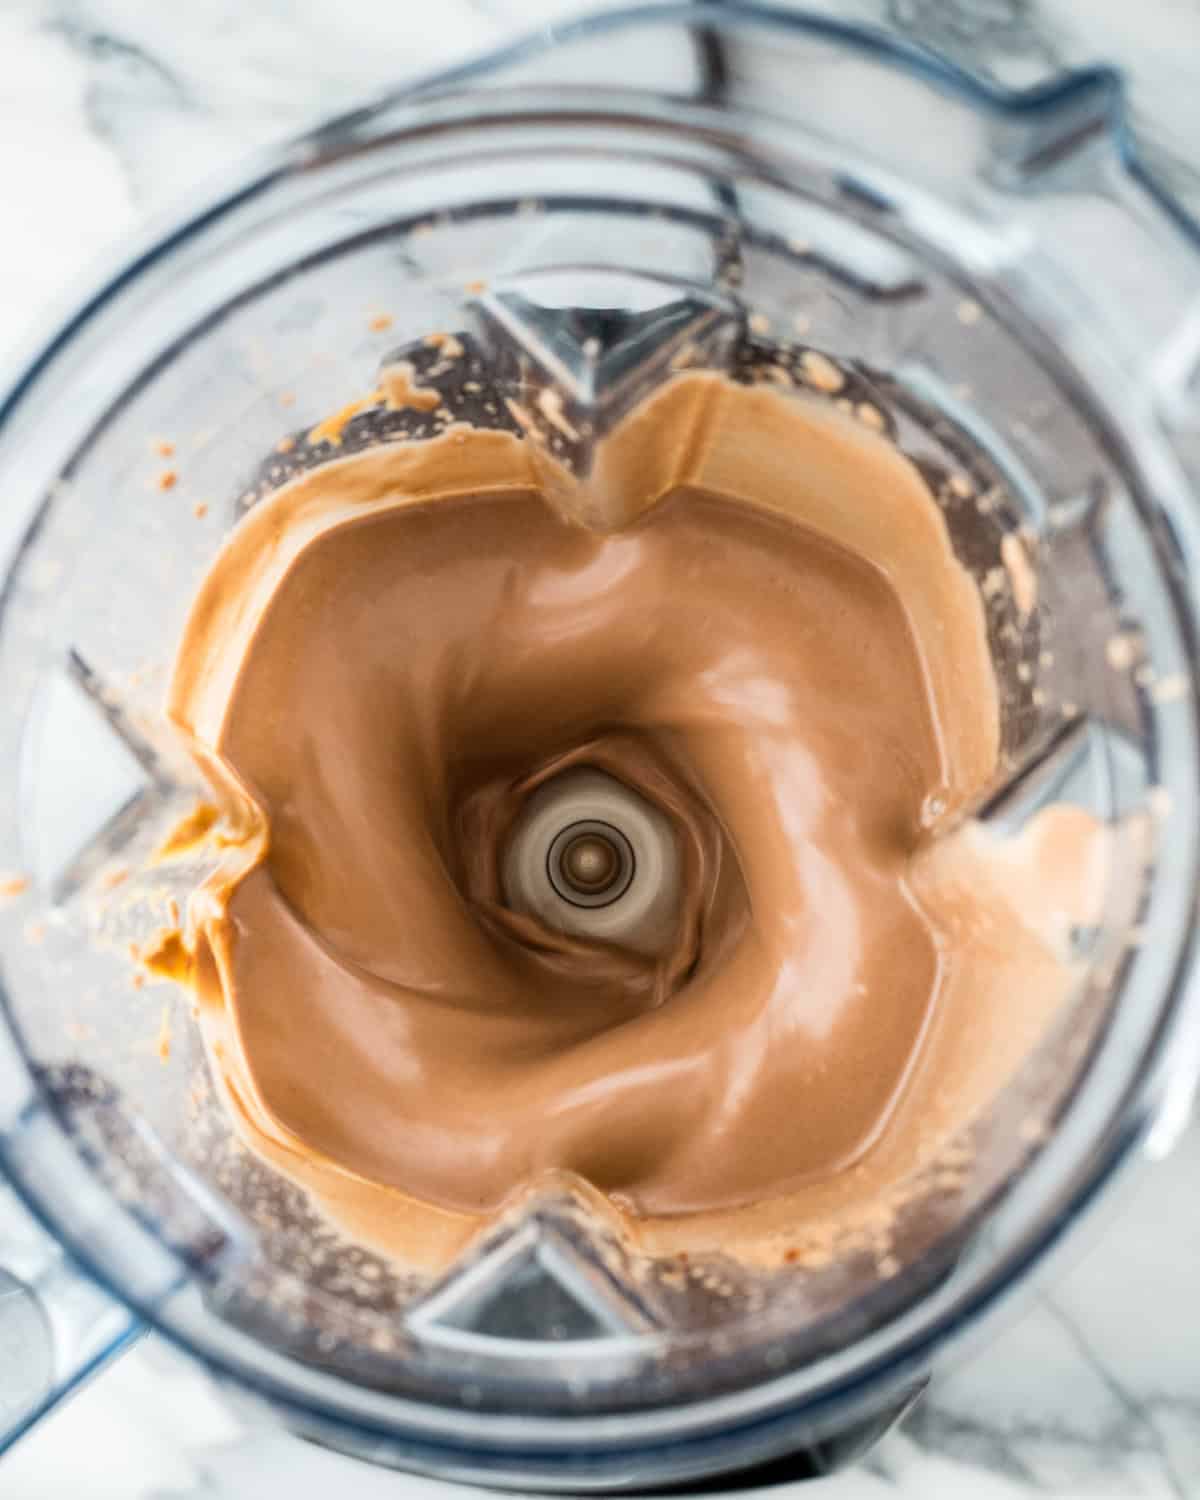 making Dairy Free Chocolate Peanut Butter Ice Cream in a blender container - ingredients blending